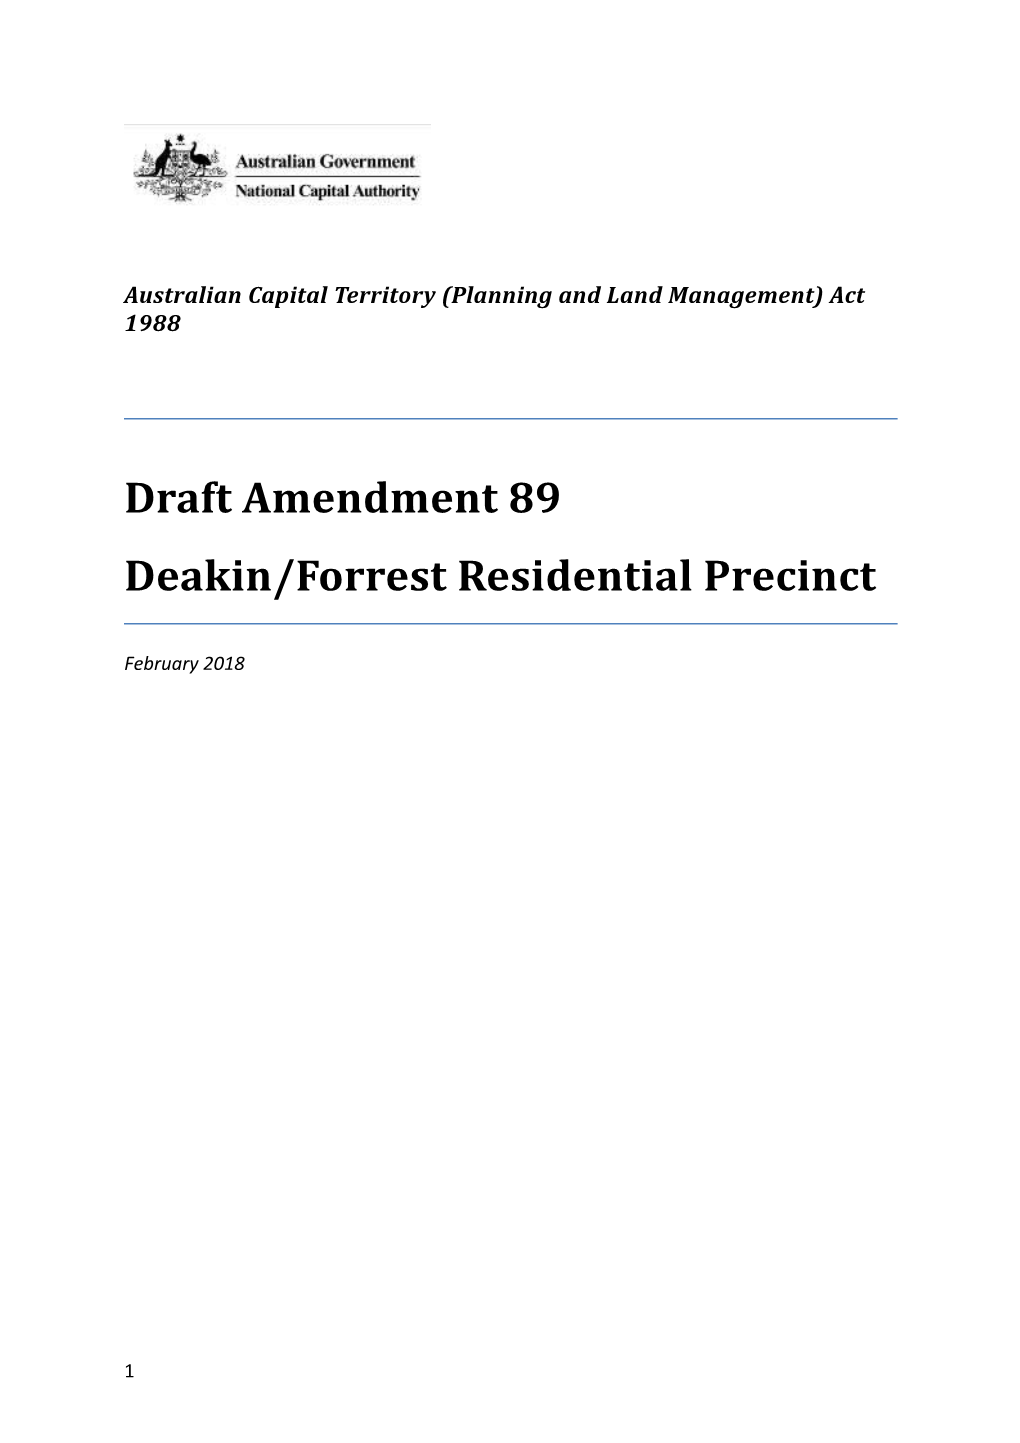 Australian Capital Territory (Planning and Land Management) Act 1988